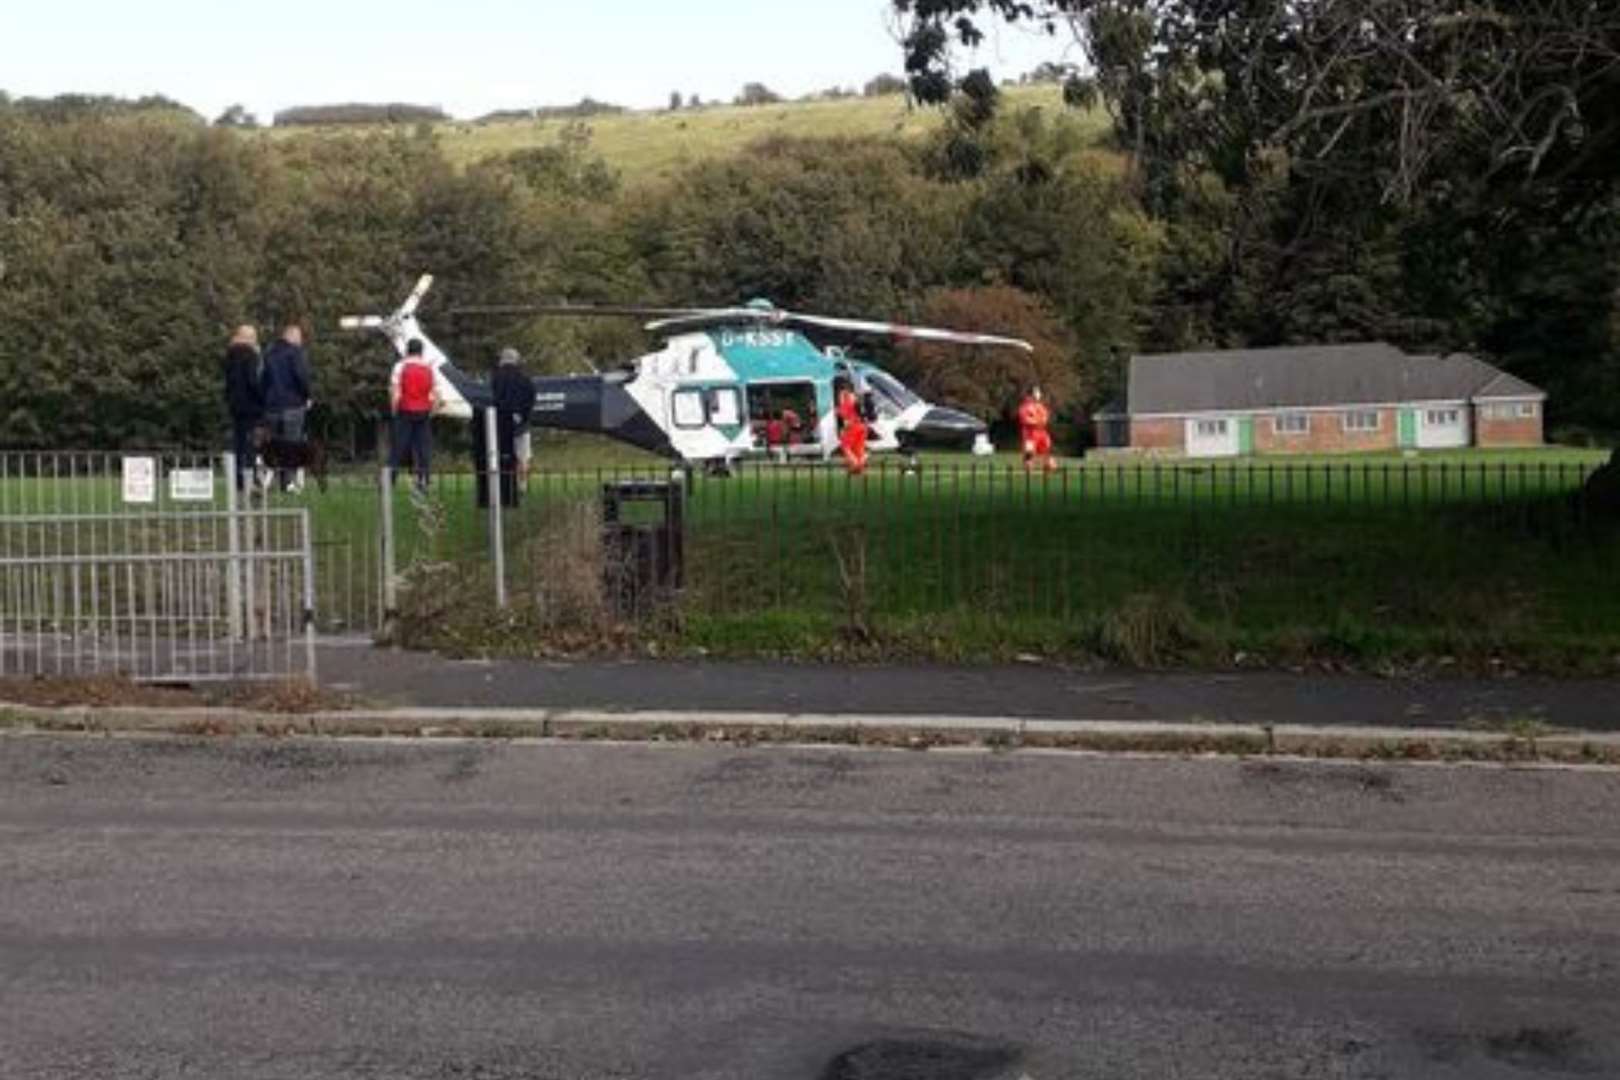 The air ambulance landed in Dover